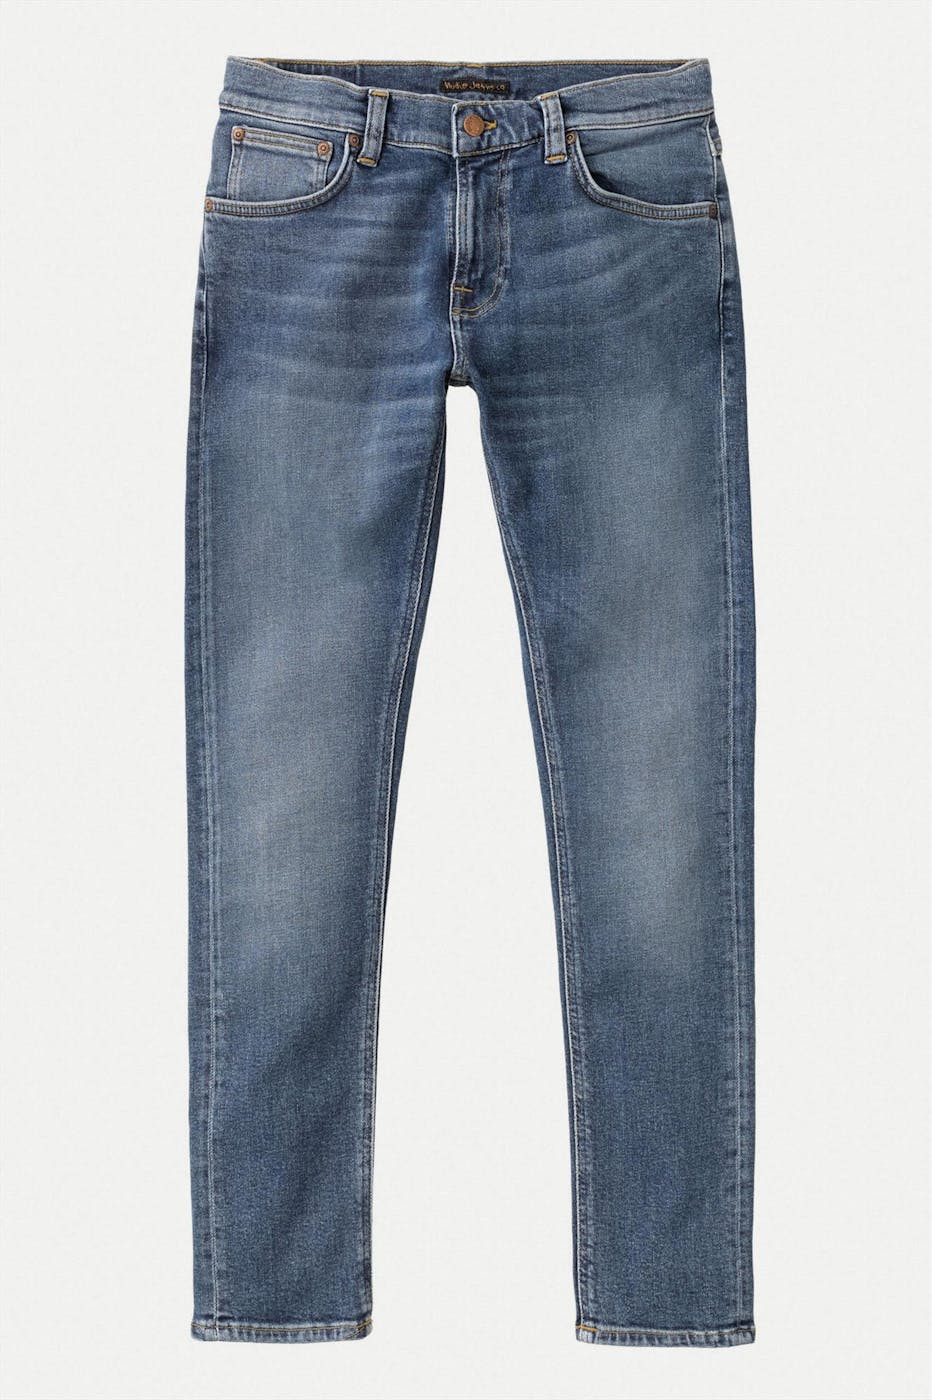 Nudie Jeans Co. - Tussenblauwe Tight Terry jeans